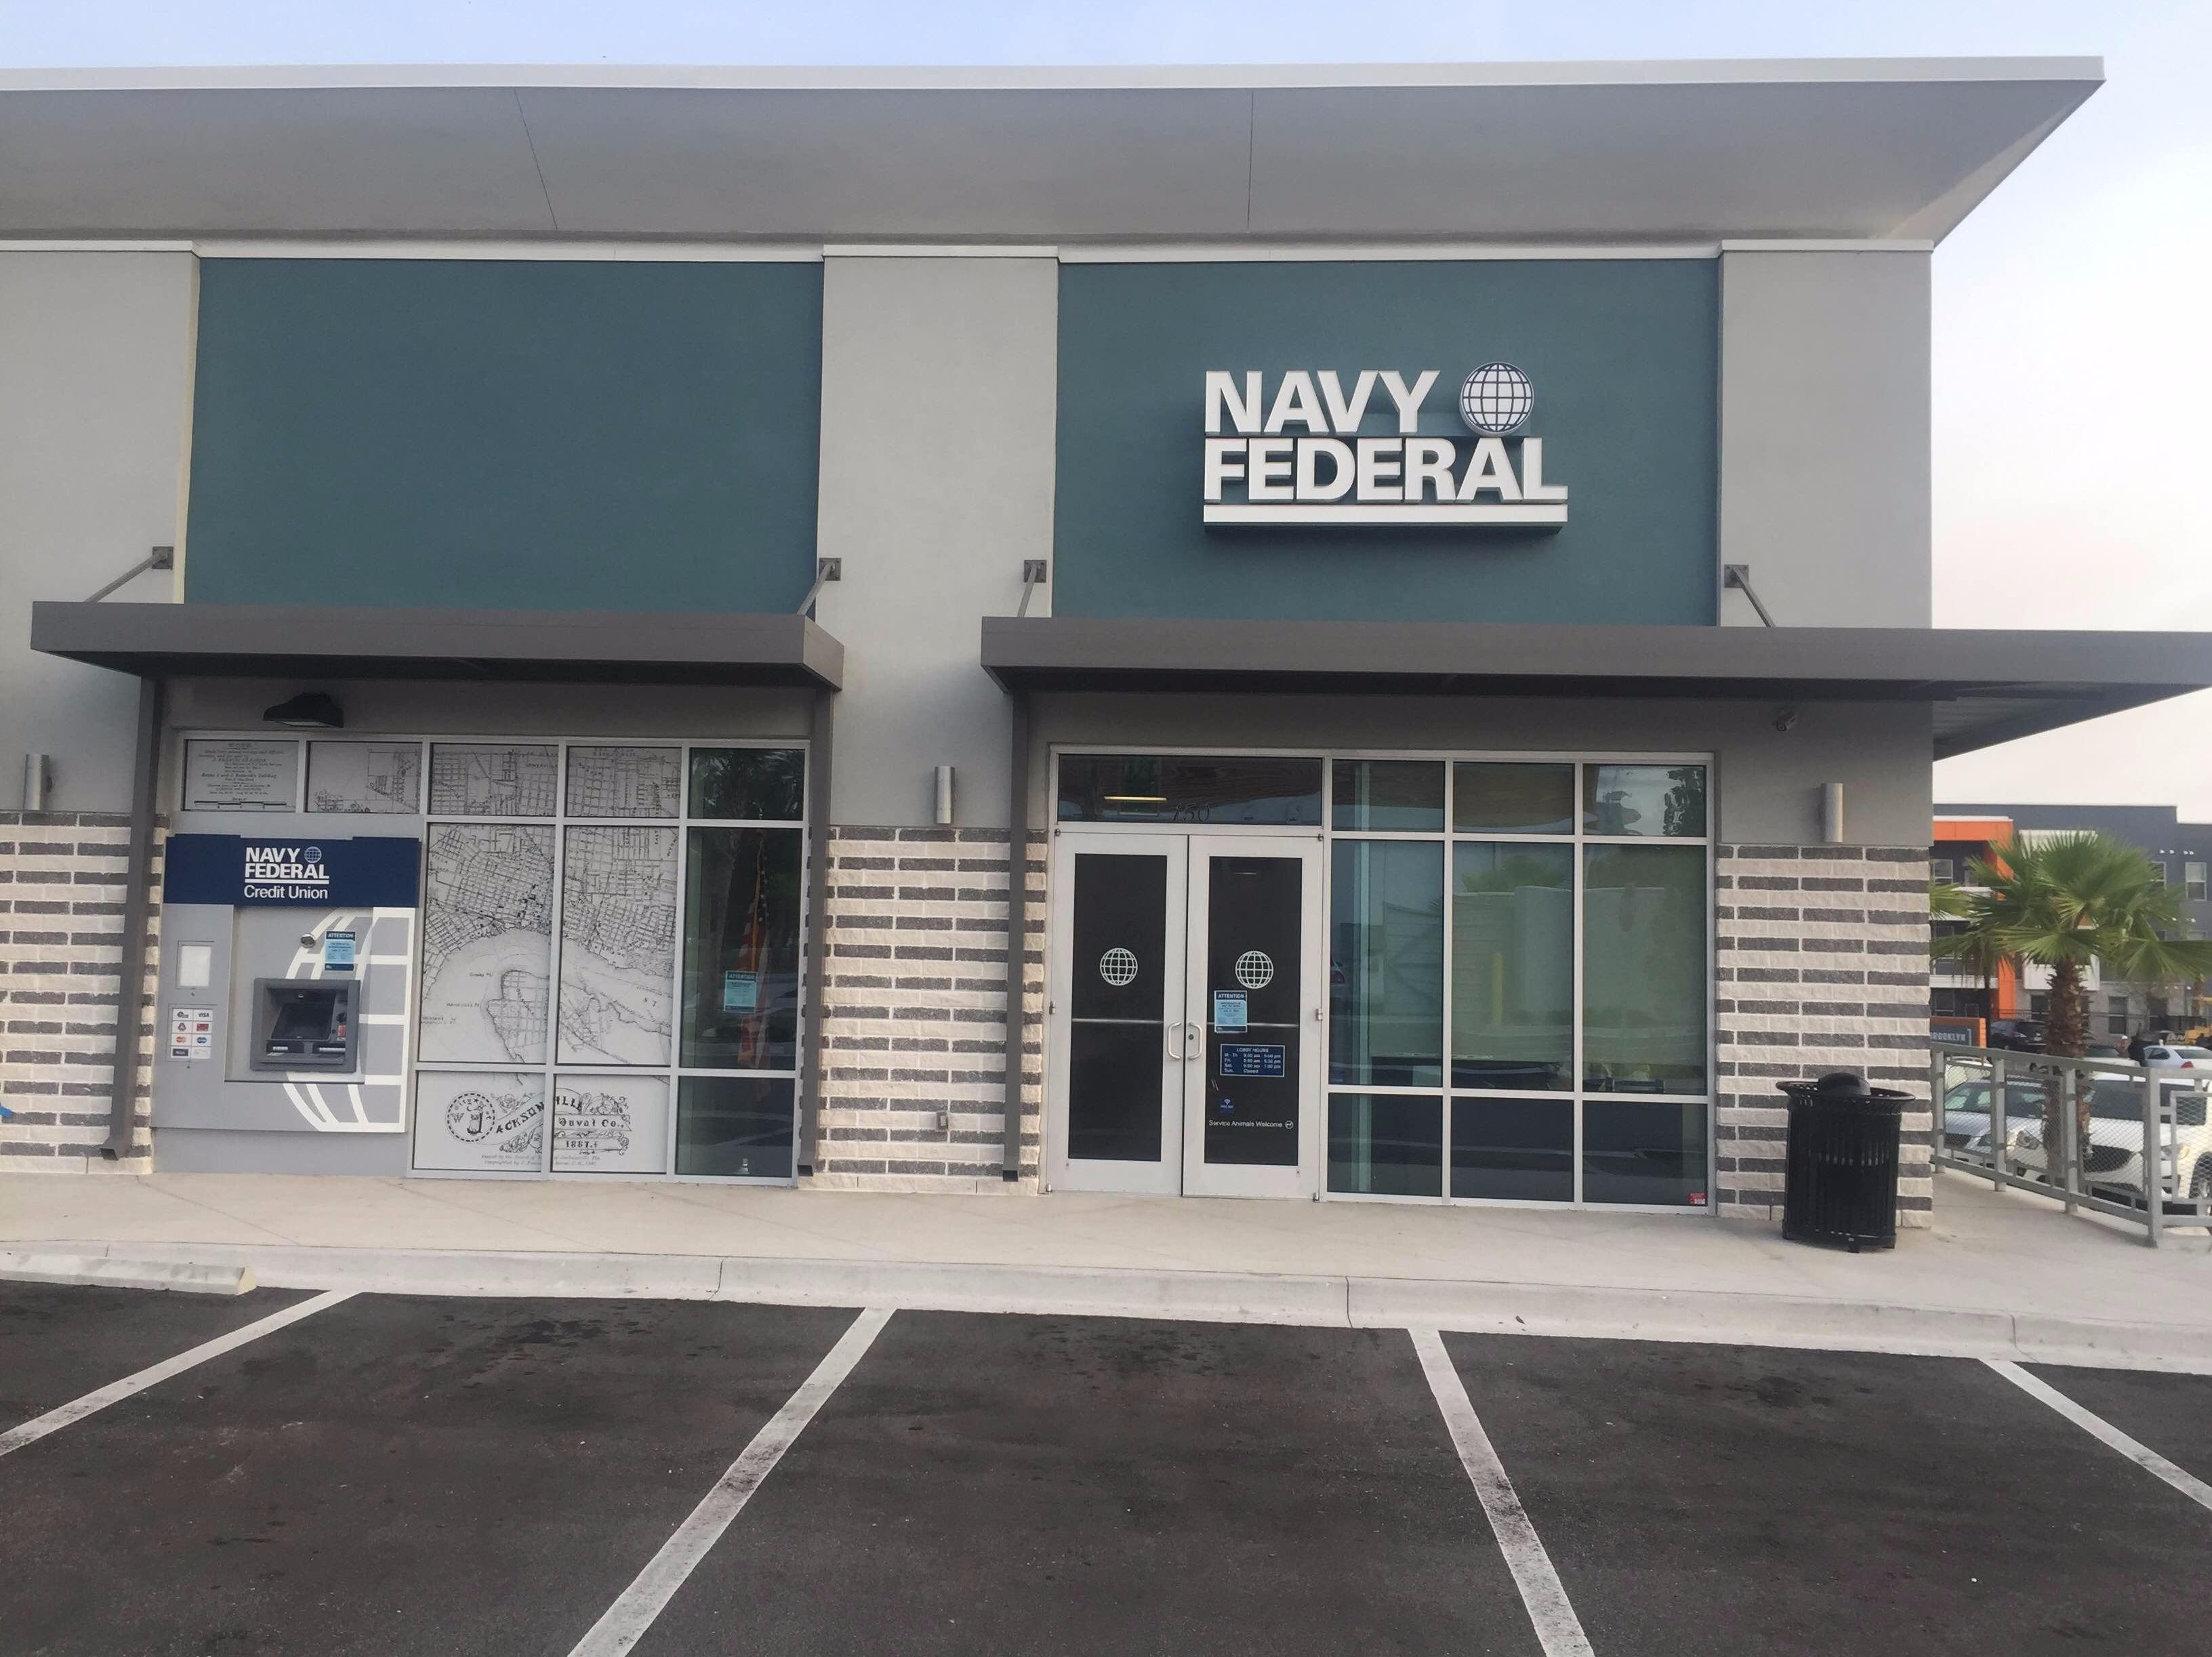 Navy Federal Credit Union Coupons near me in Jacksonville | 8coupons